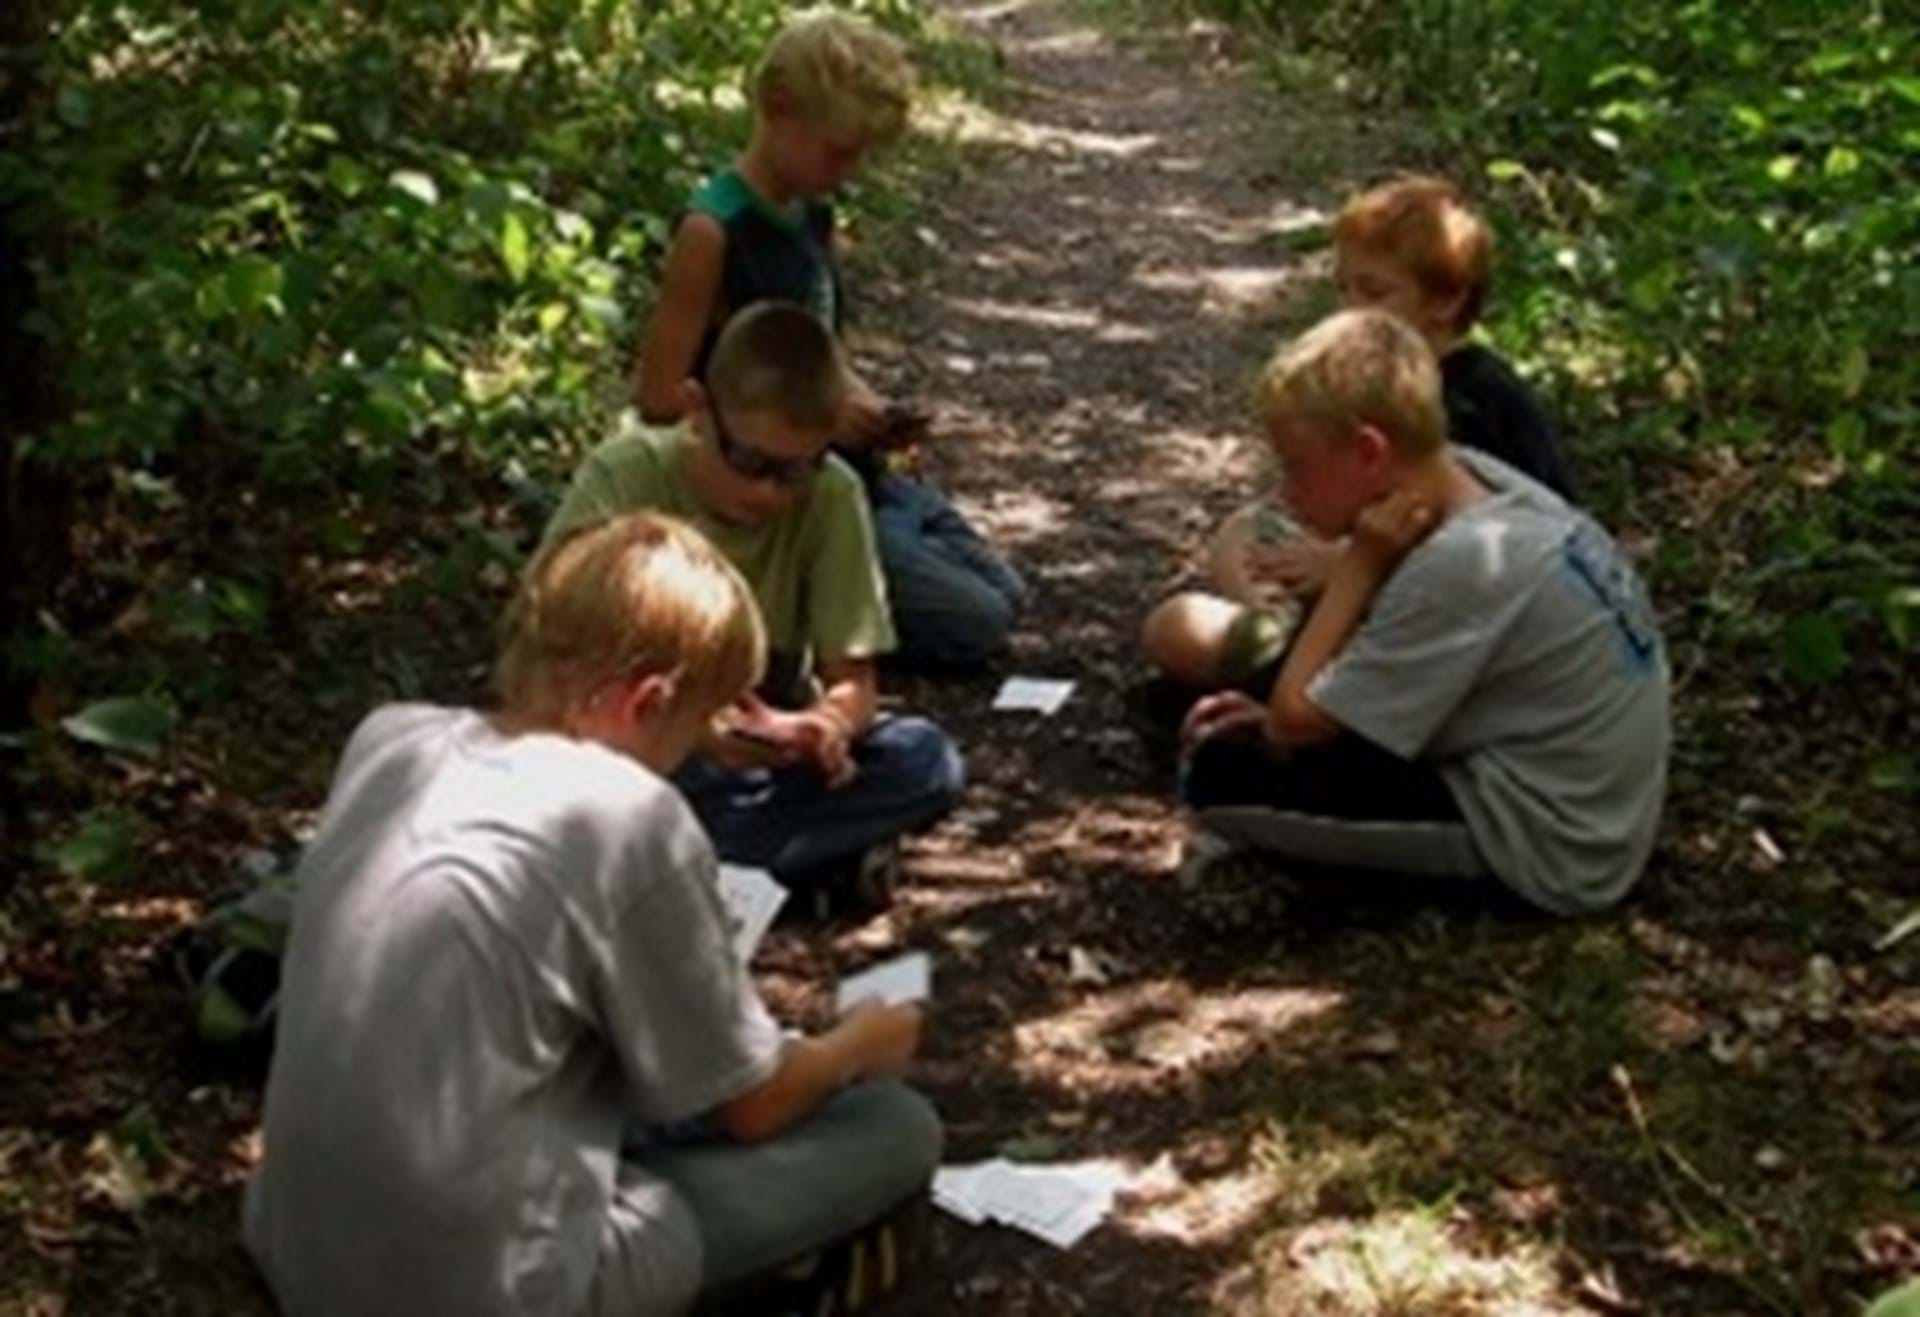 Hartman educational programming and summer camps expand knowledge and create memories.